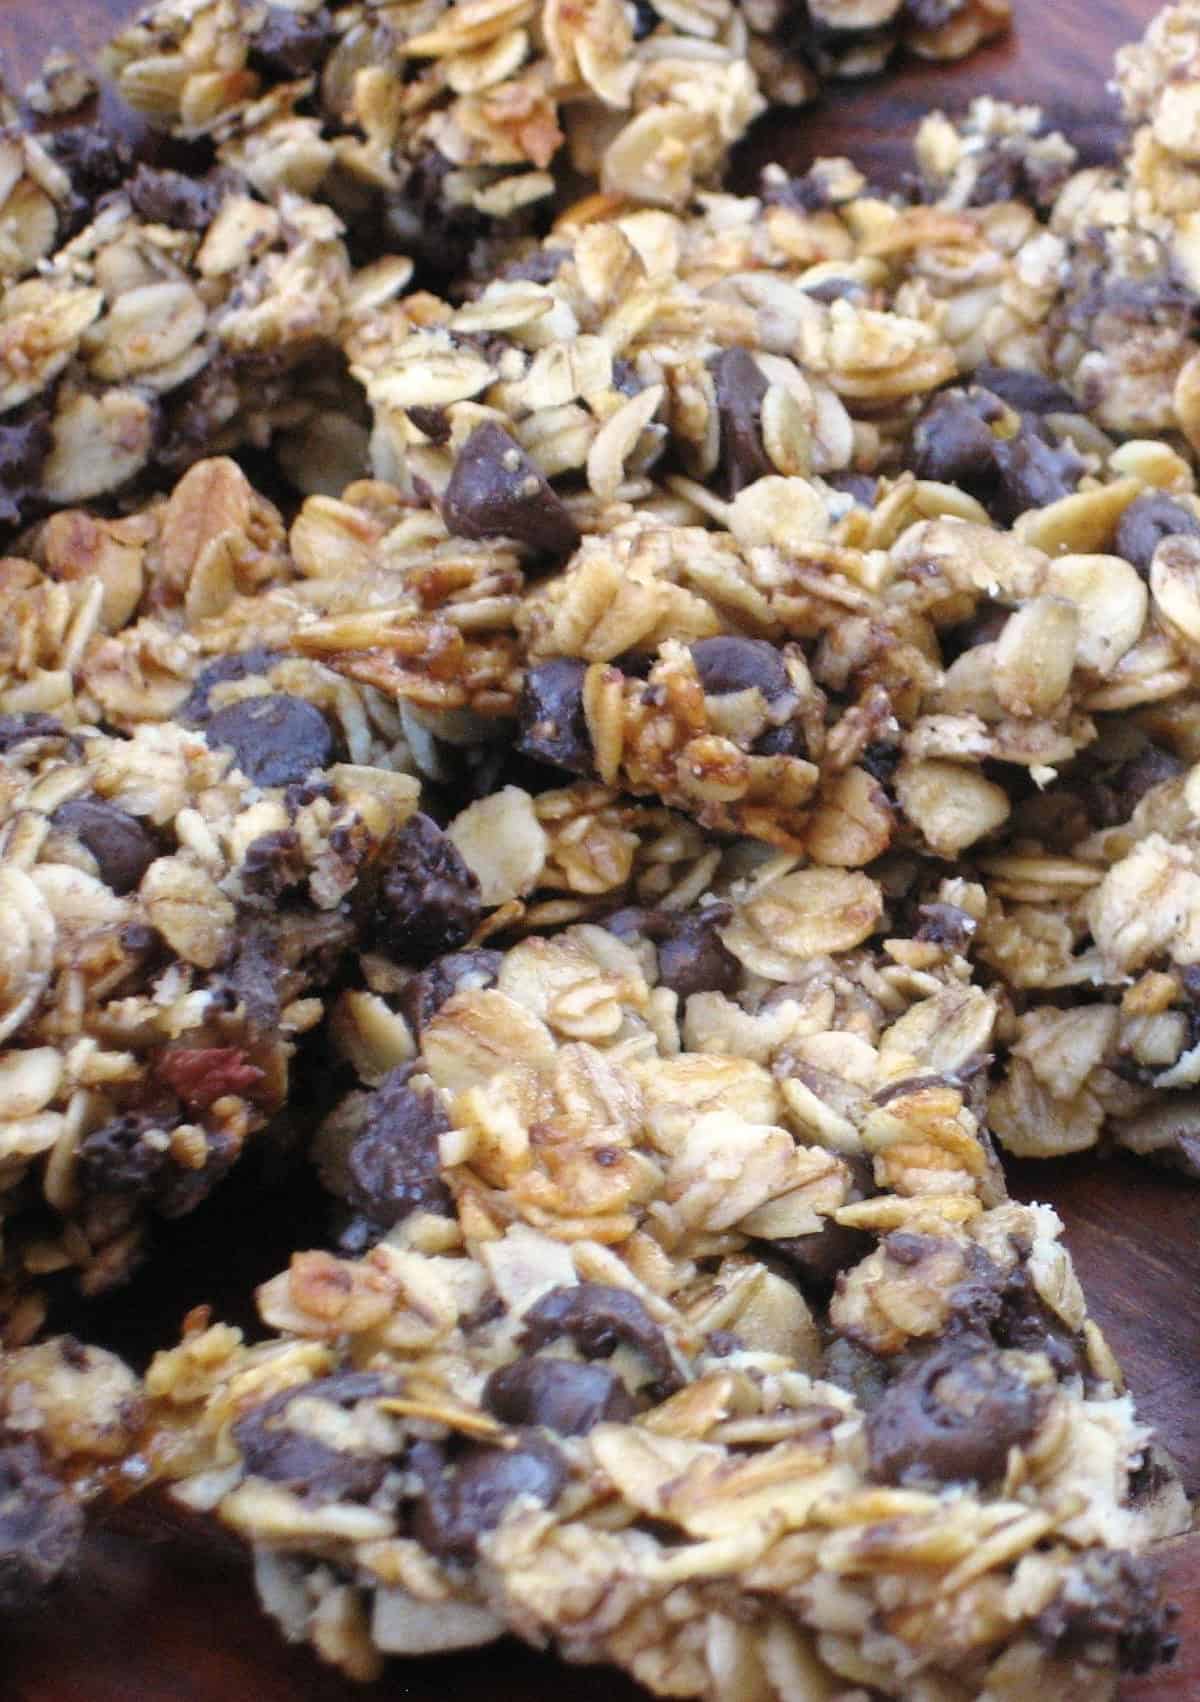  Crunchy oats and nuts mixed with sweet honey and molasses - this is my homemade Hudson's Bay Bread!